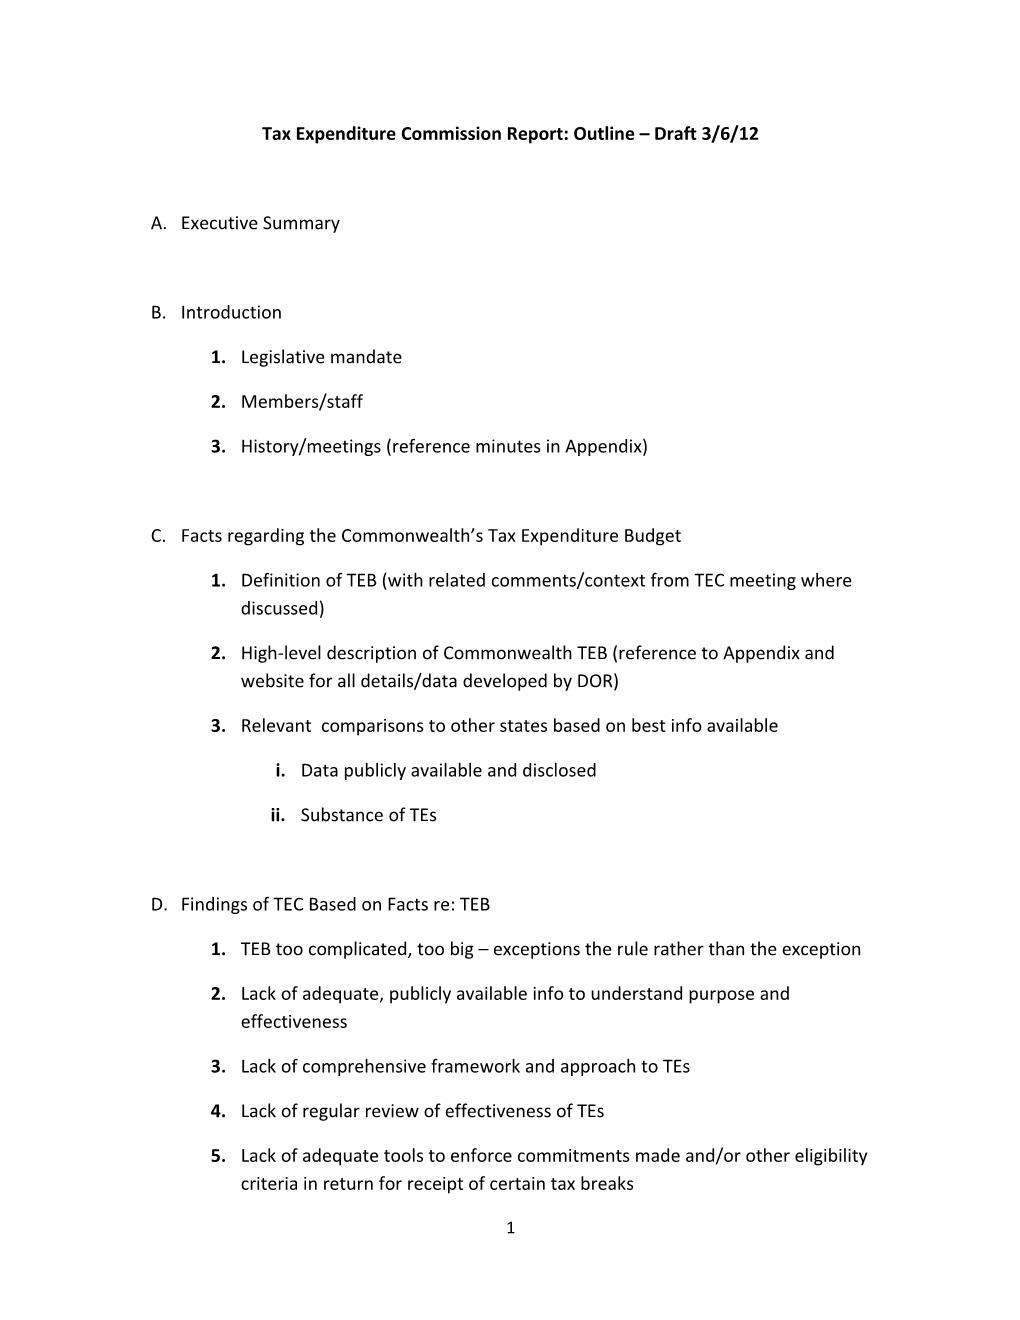 Tax Expenditure Commission Report: Outline Draft 3/6/12